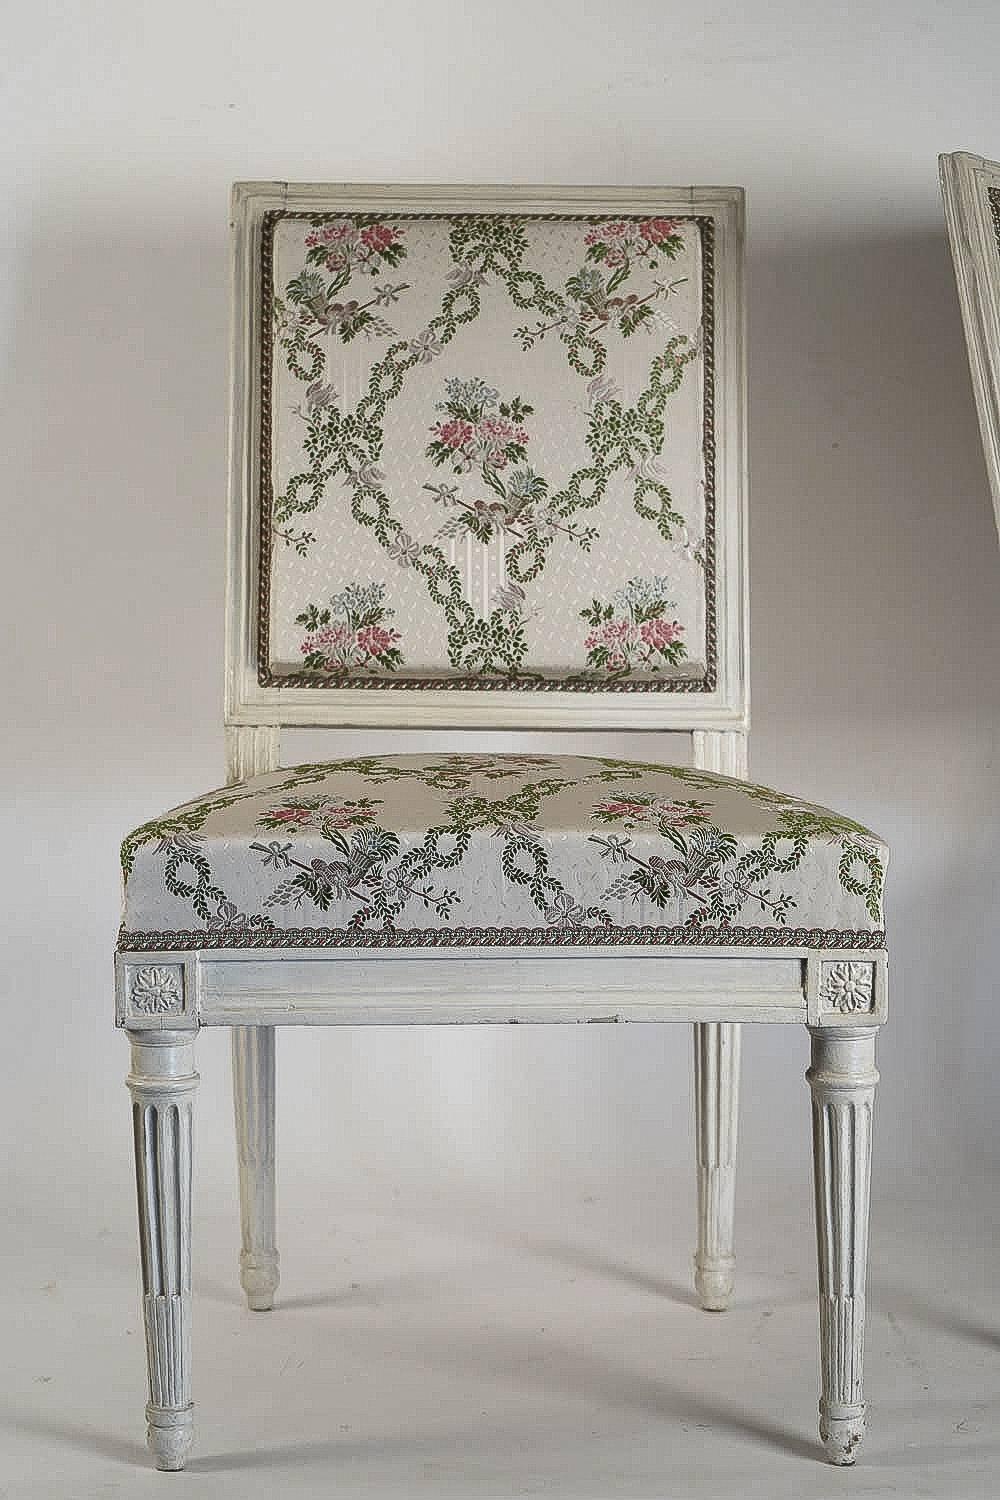 French Pair of Chairs Late 18th Century Louis XVI Period by Georges Jacob, circa 1780